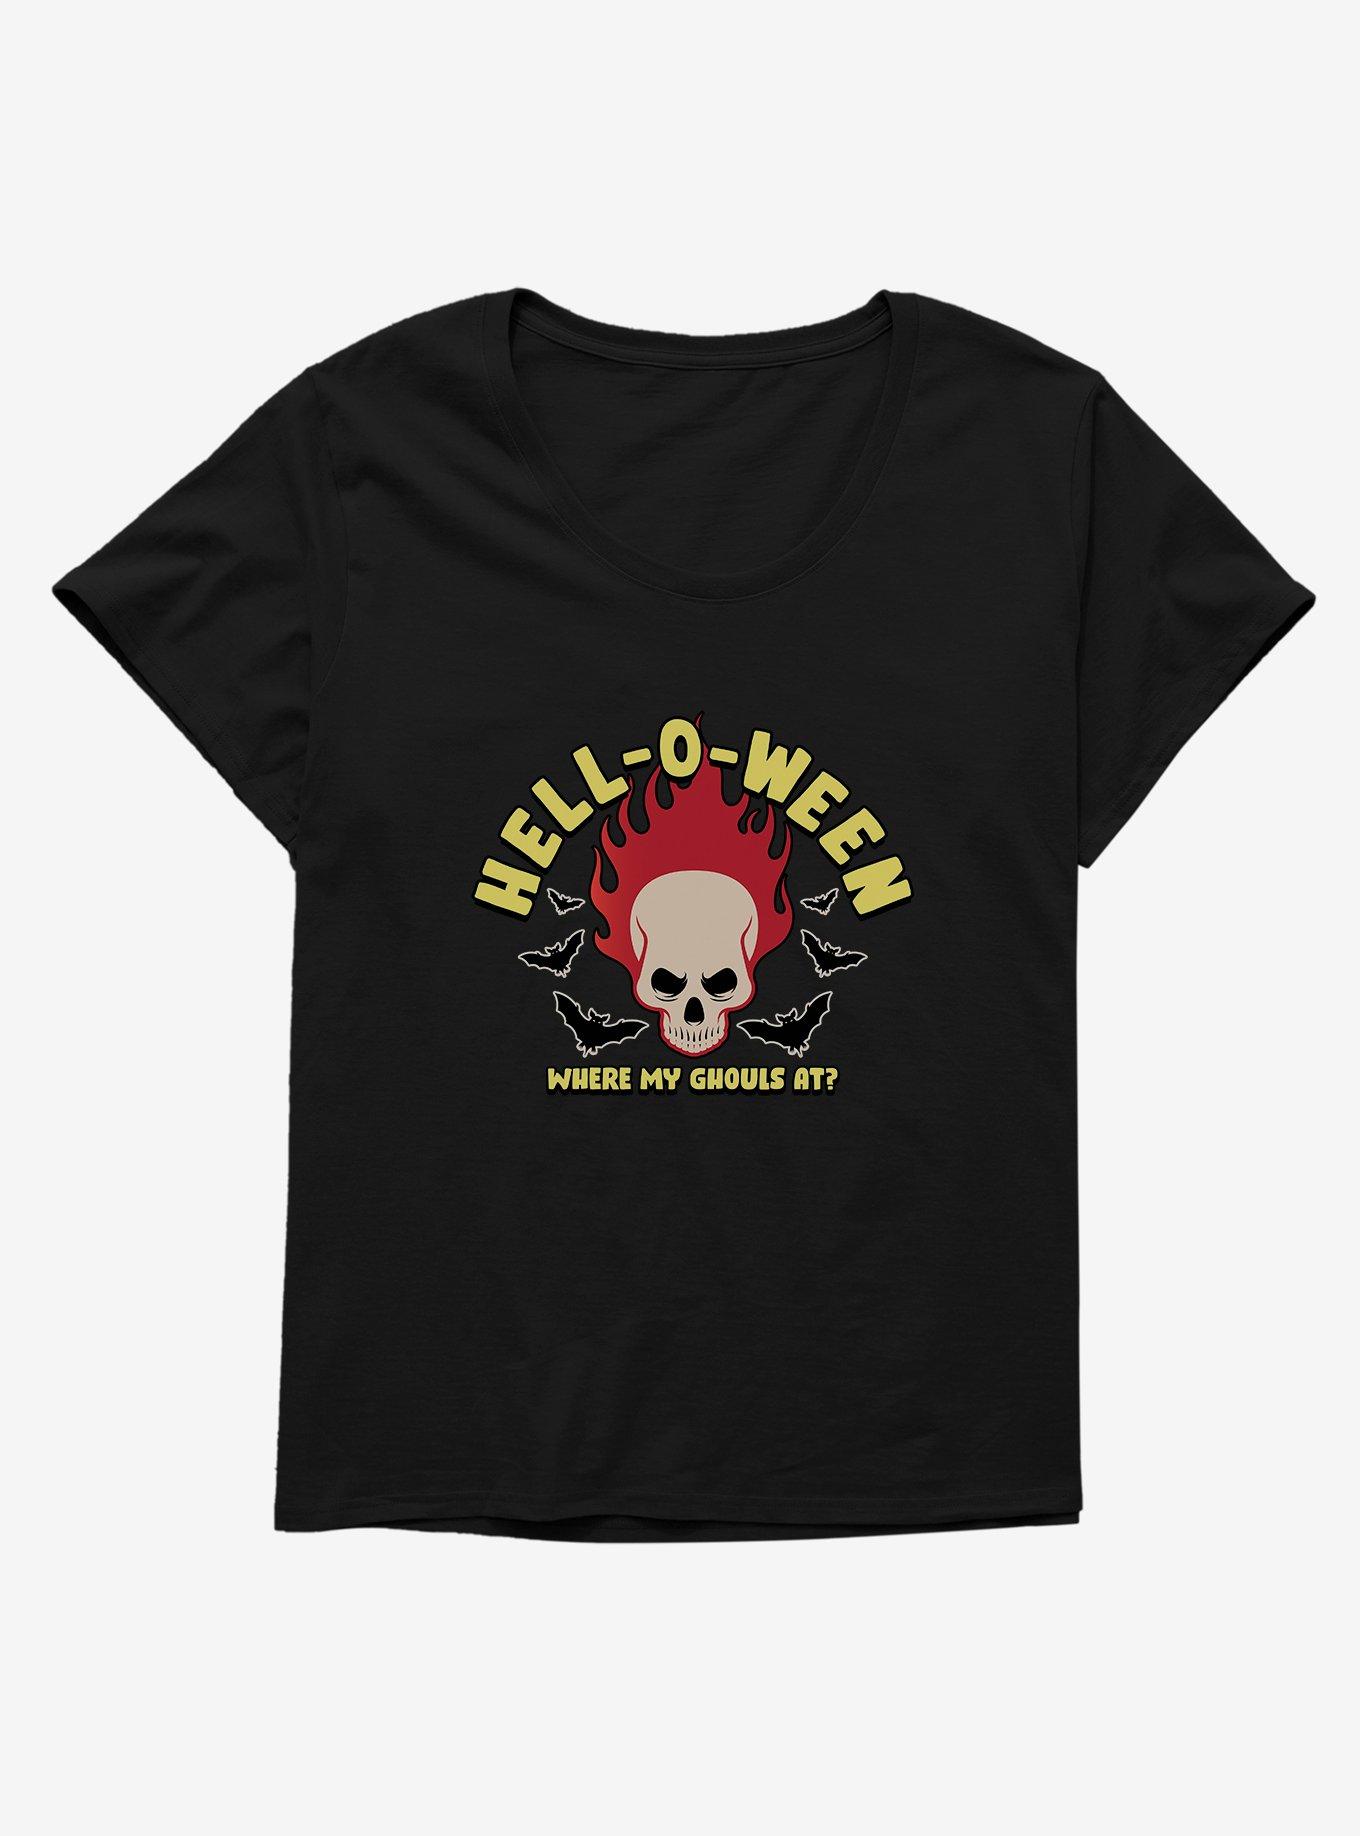 Halloween Hell-O-Ween Flaming Skull Plus Size T-Shirt, BLACK, hi-res